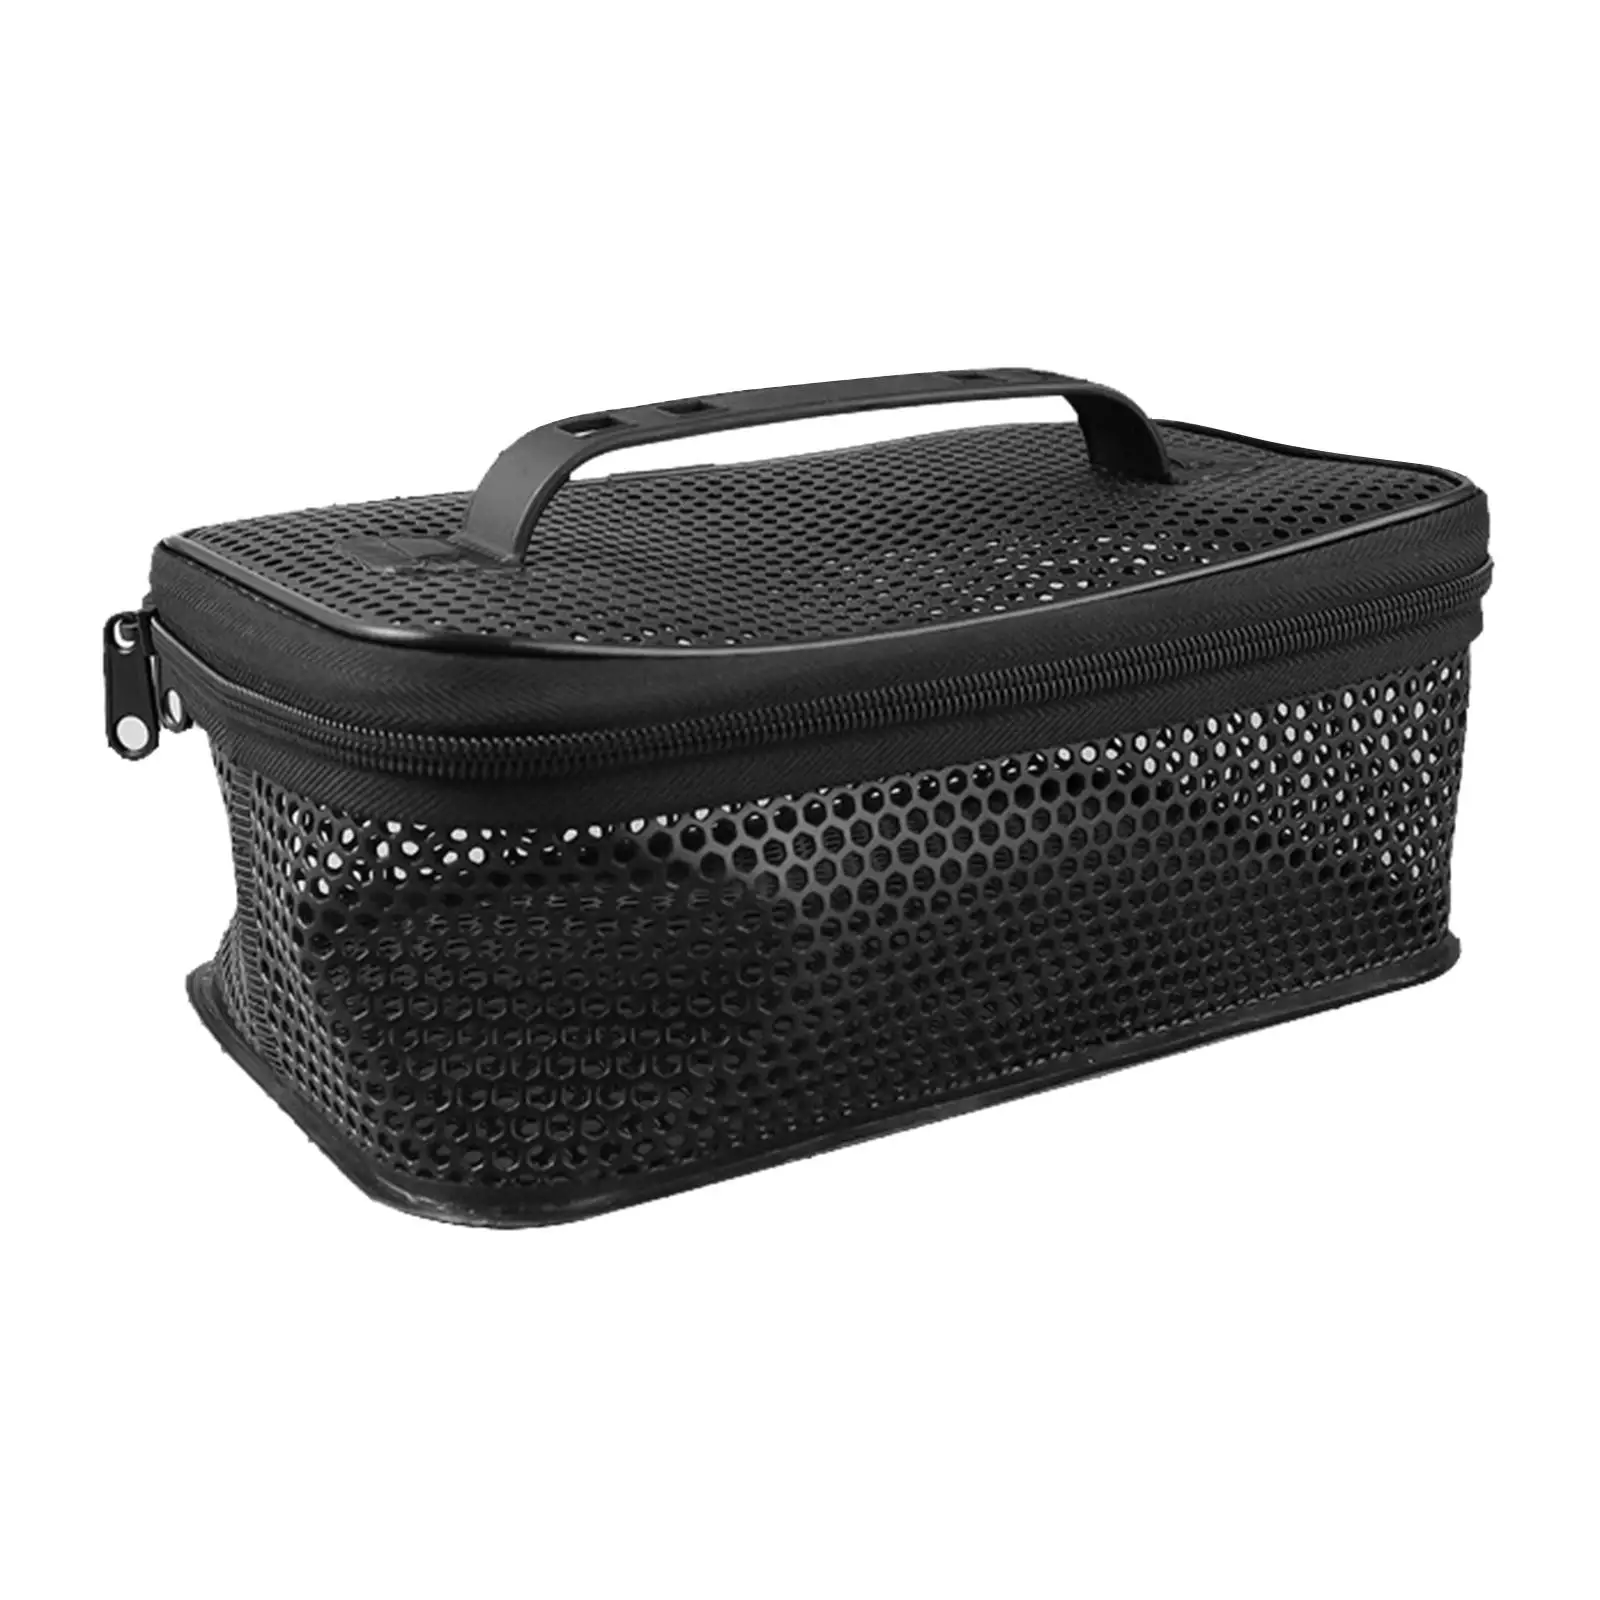 Tackle Carry Case Sturdy Outdoor Fishing Accessories Wear Resistant Mesh Container Fishing Bait Bag Hollowed Out Lure Pouch